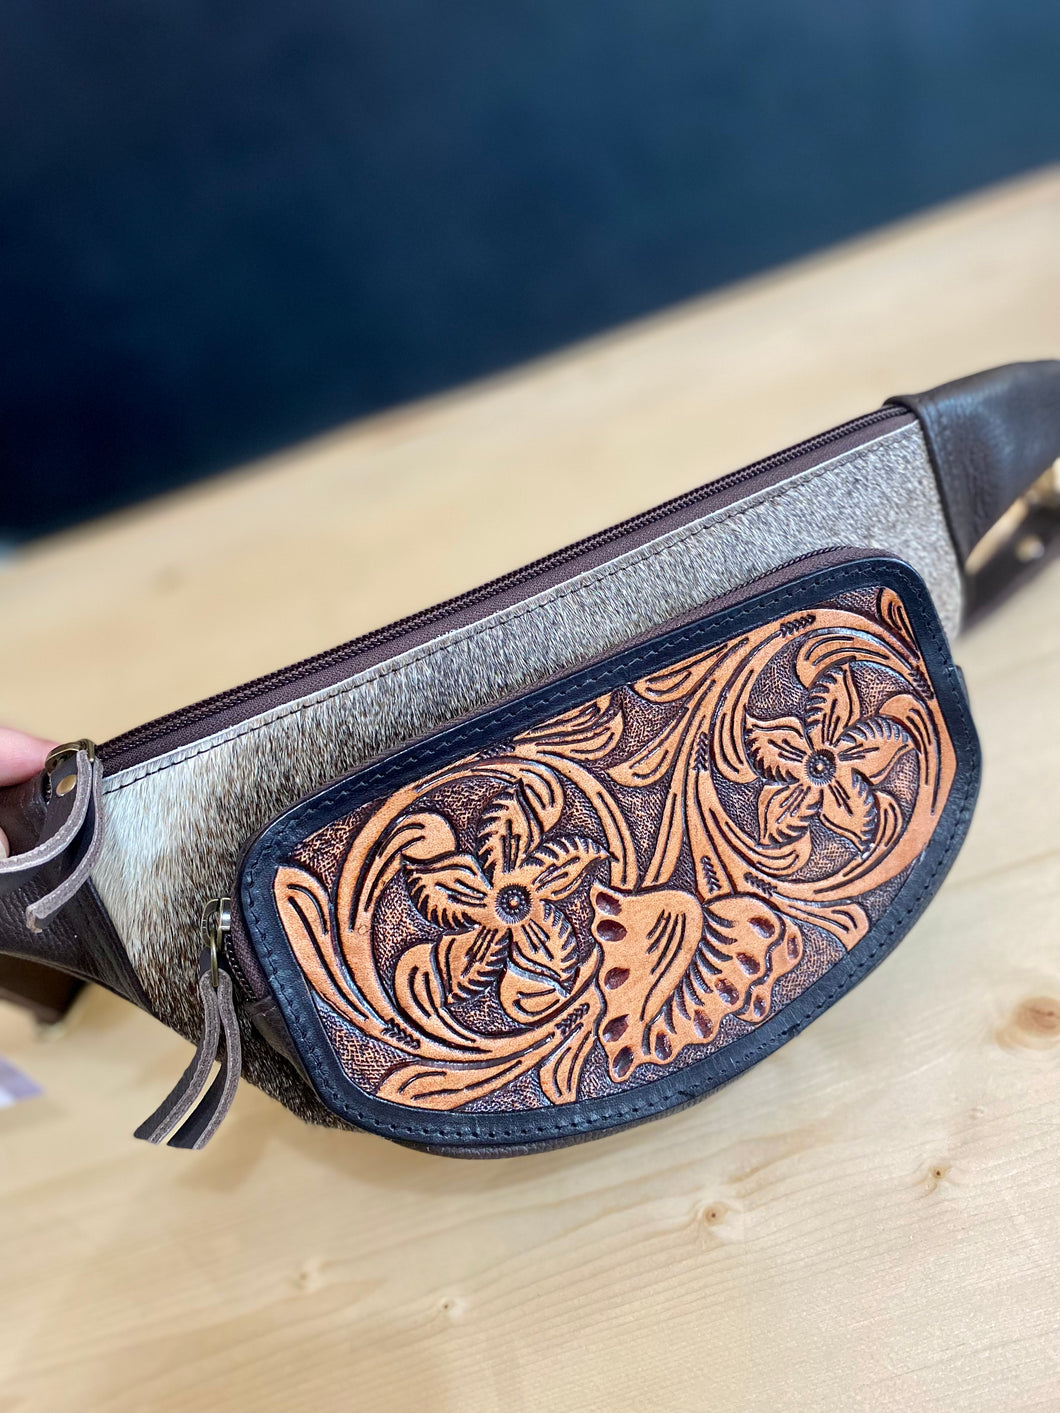 Cowhide / Tooled Leather Fanny